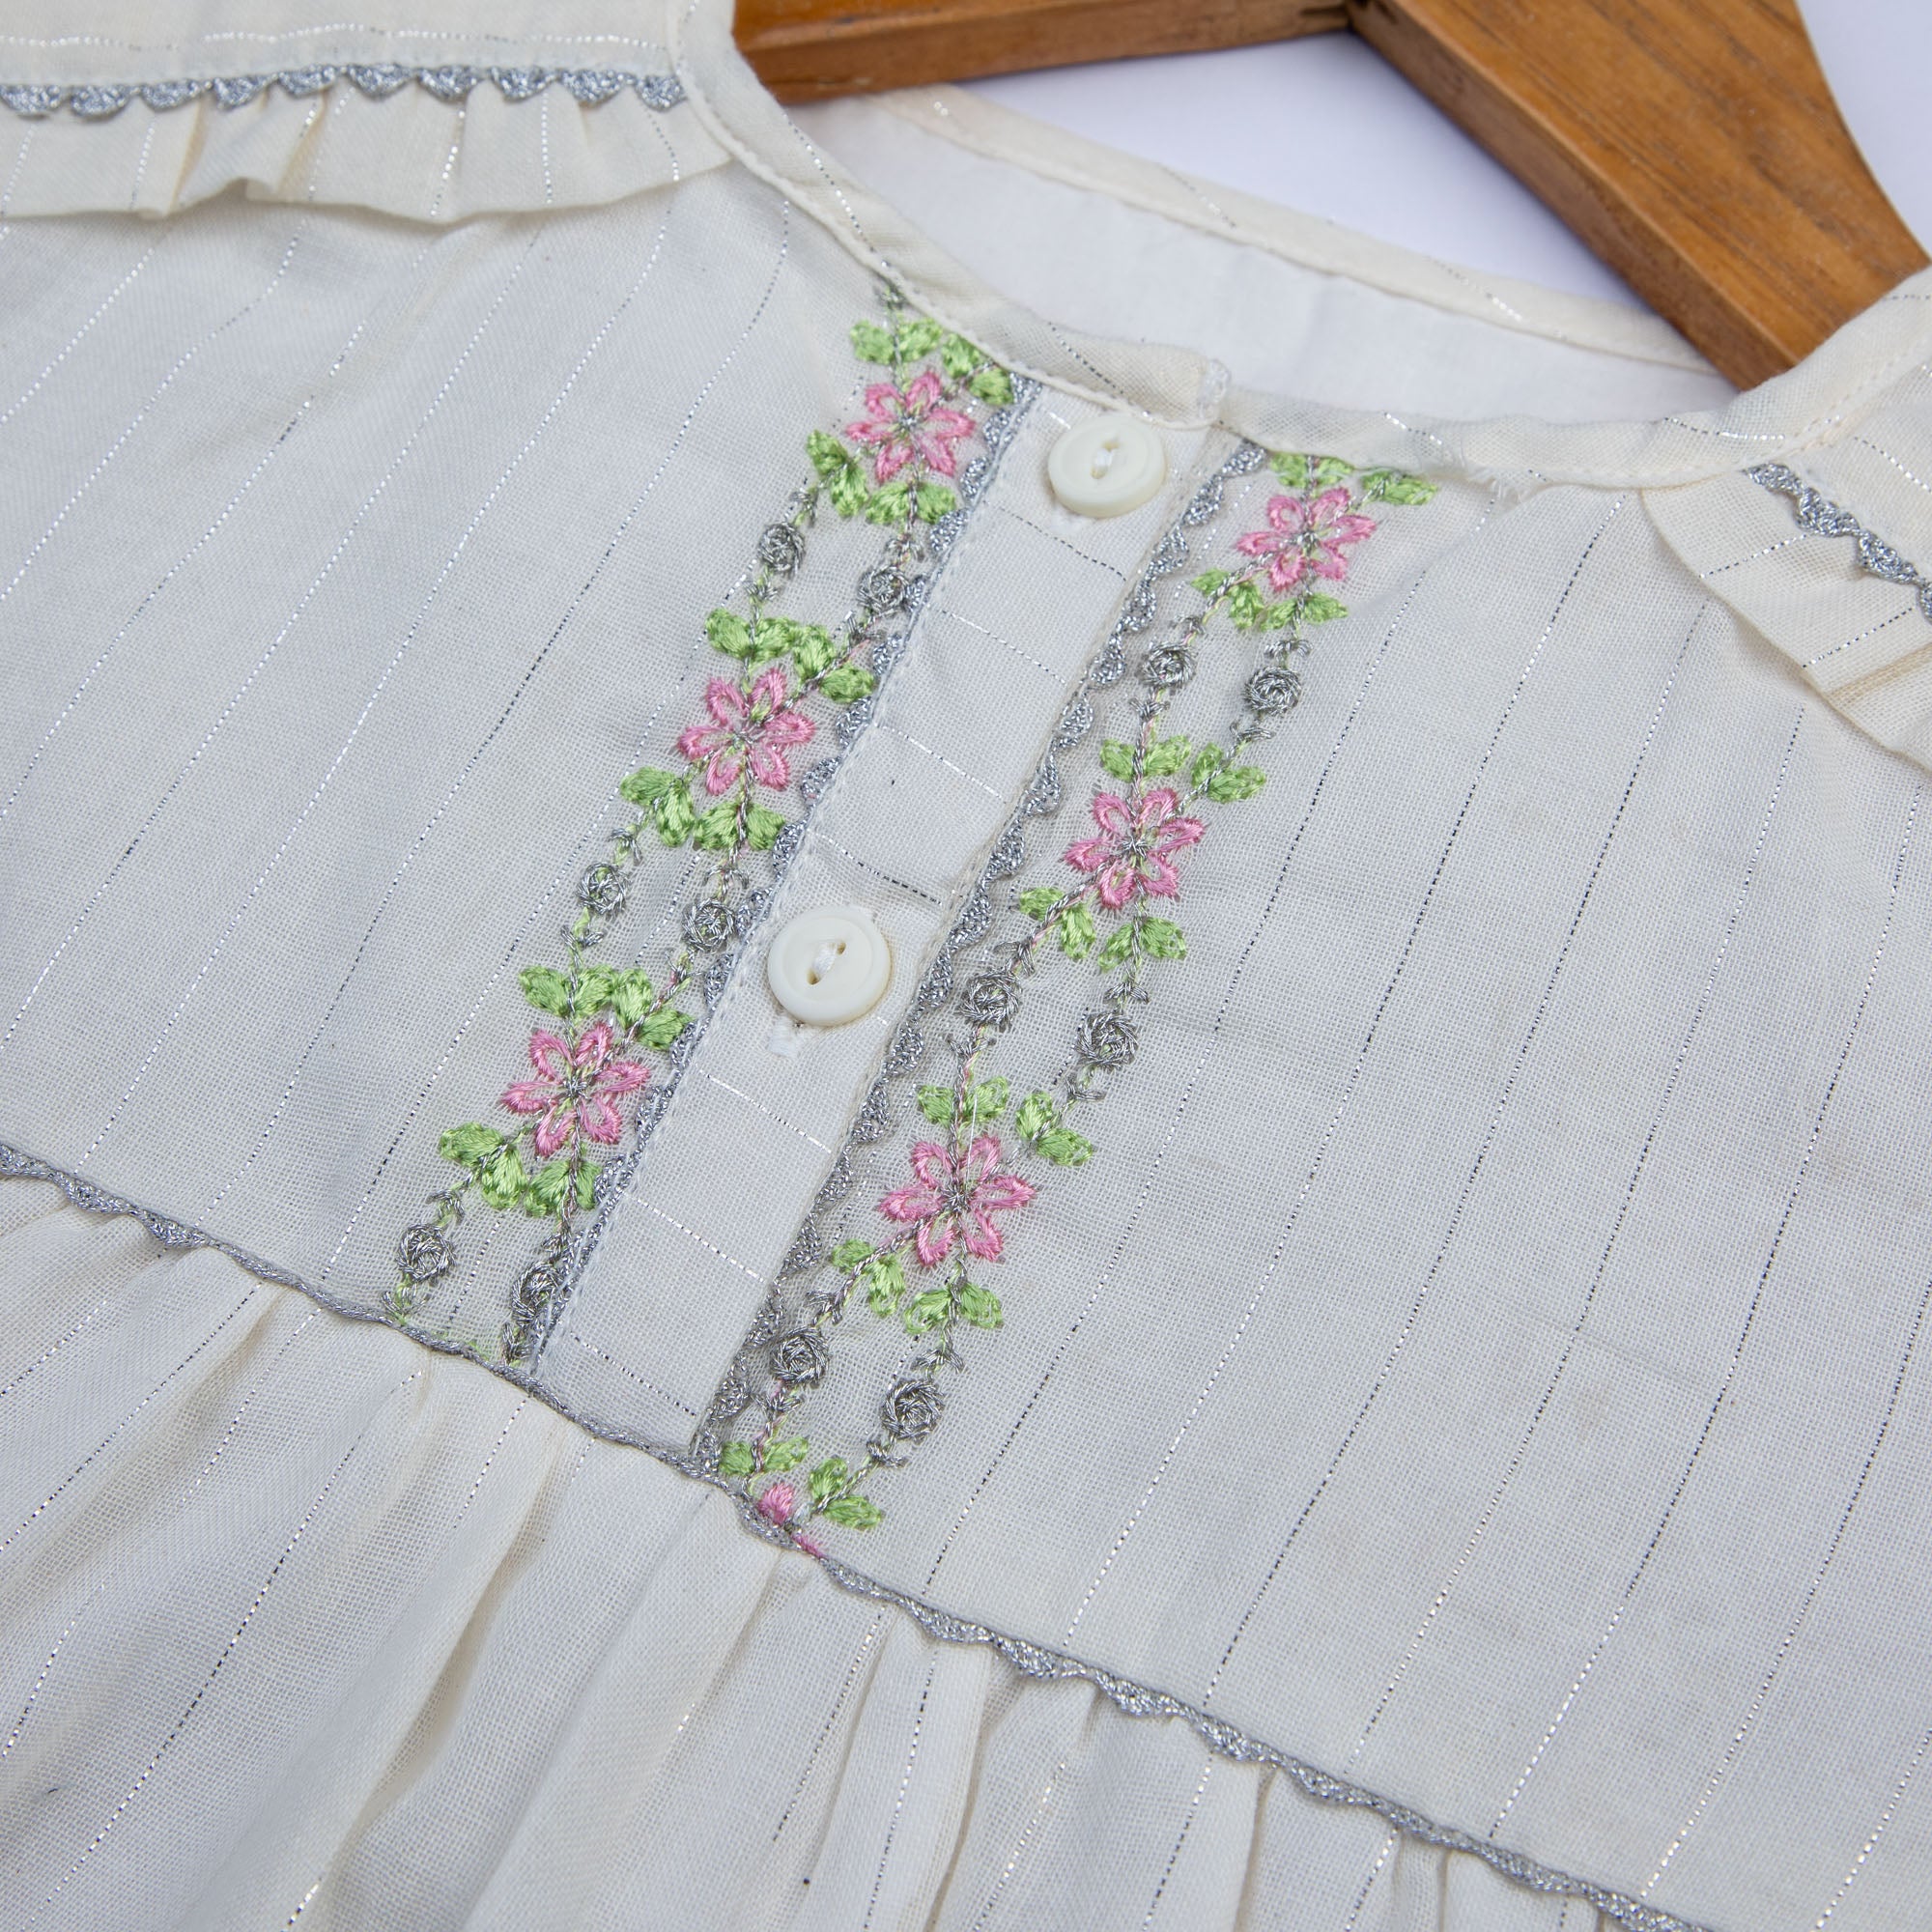 Schick White Embroidered Top